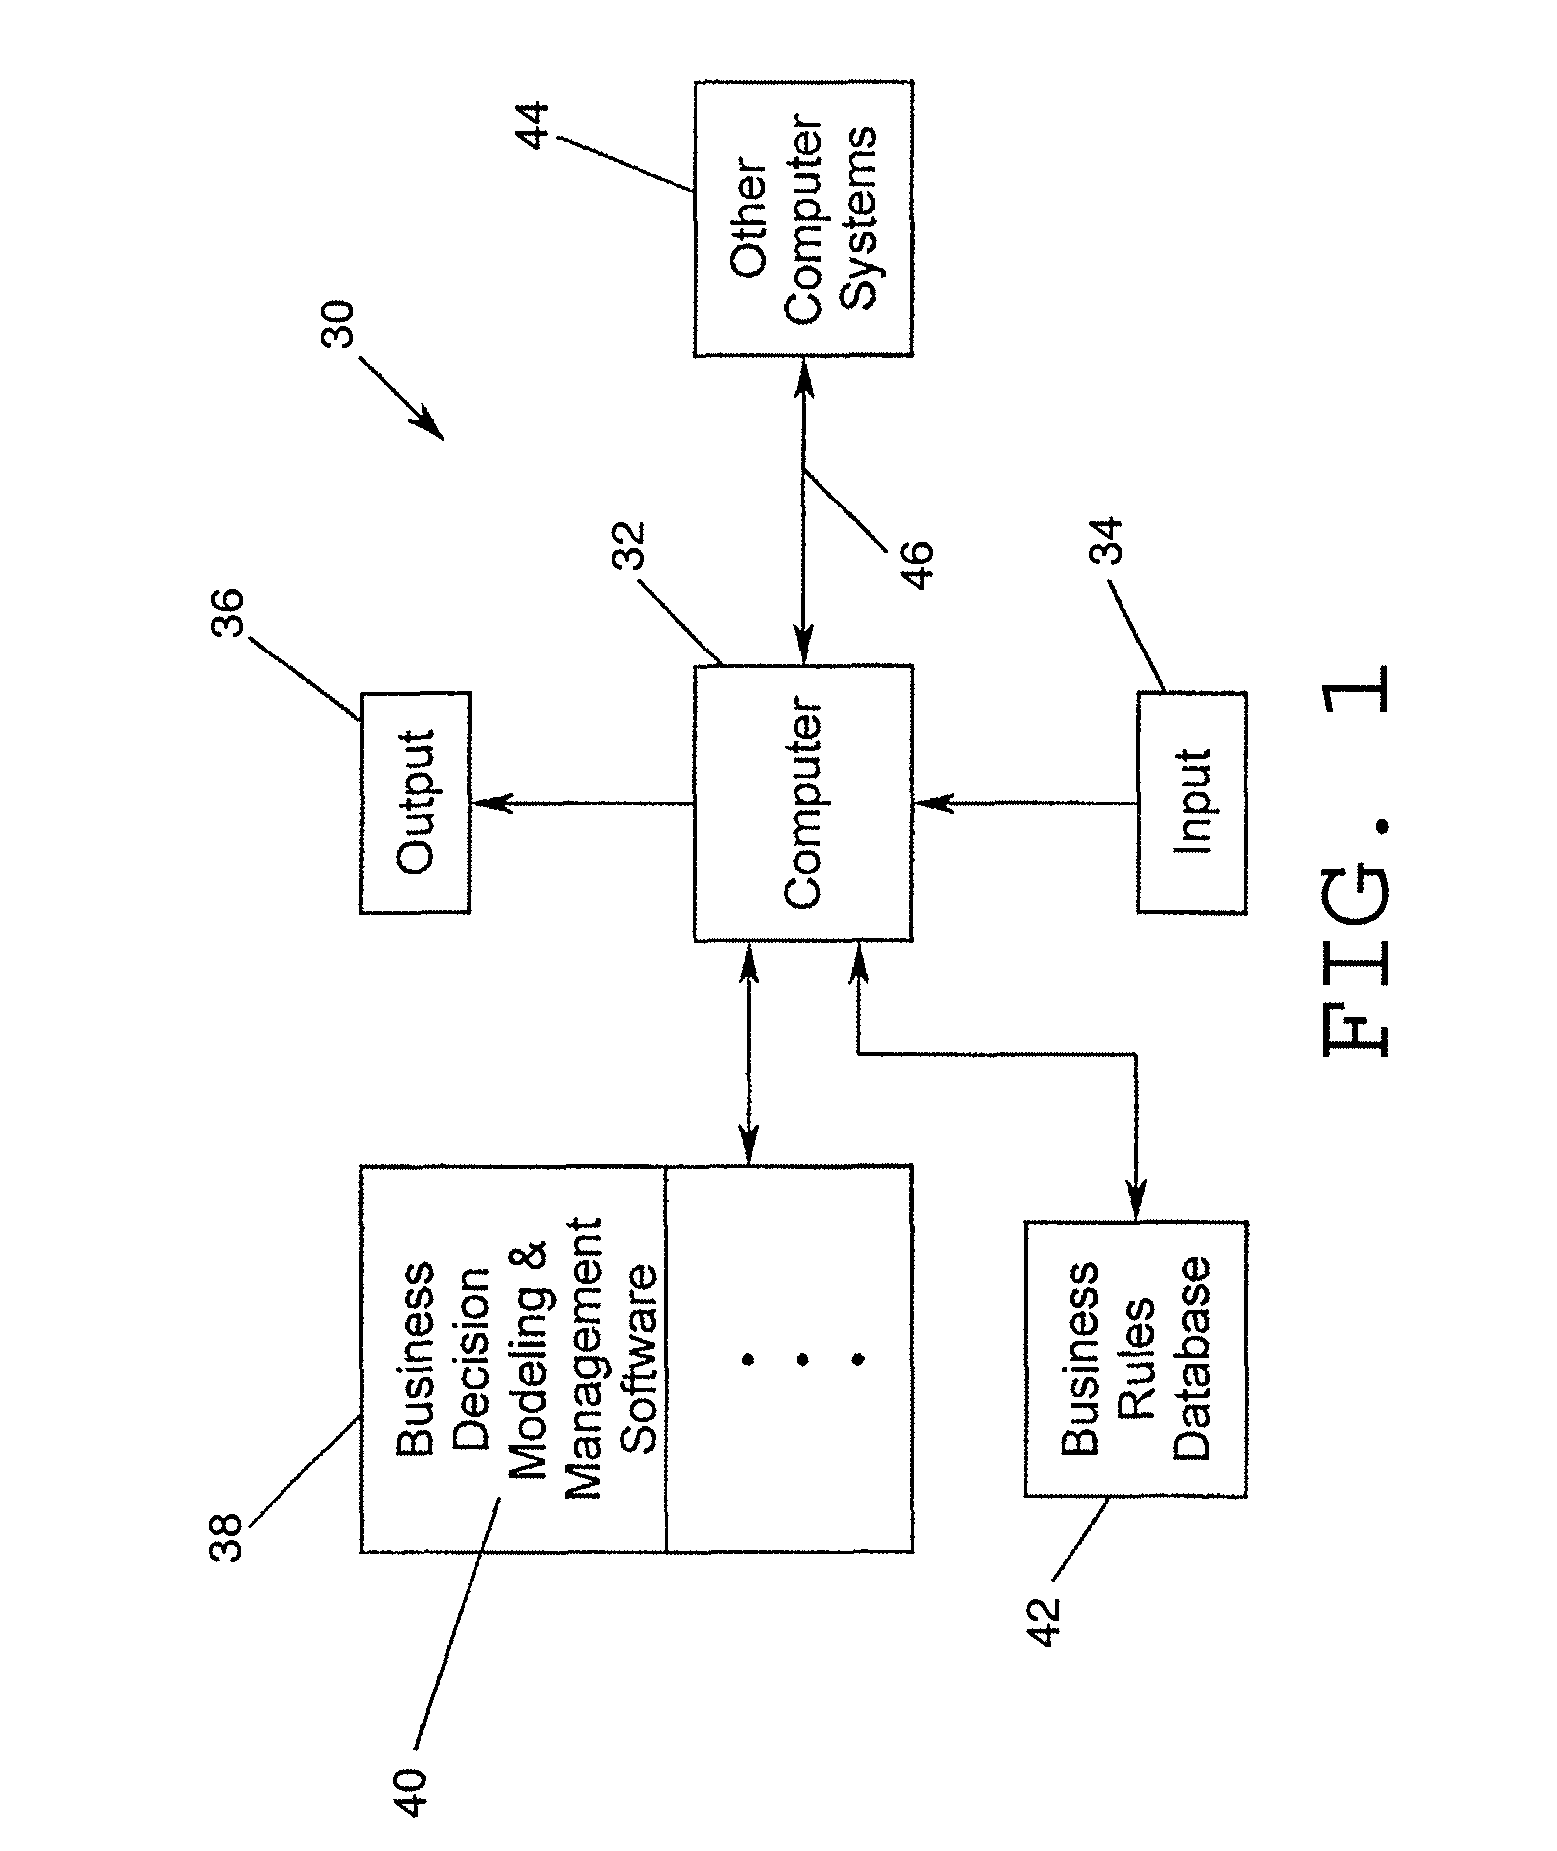 Business decision modeling and management system and method